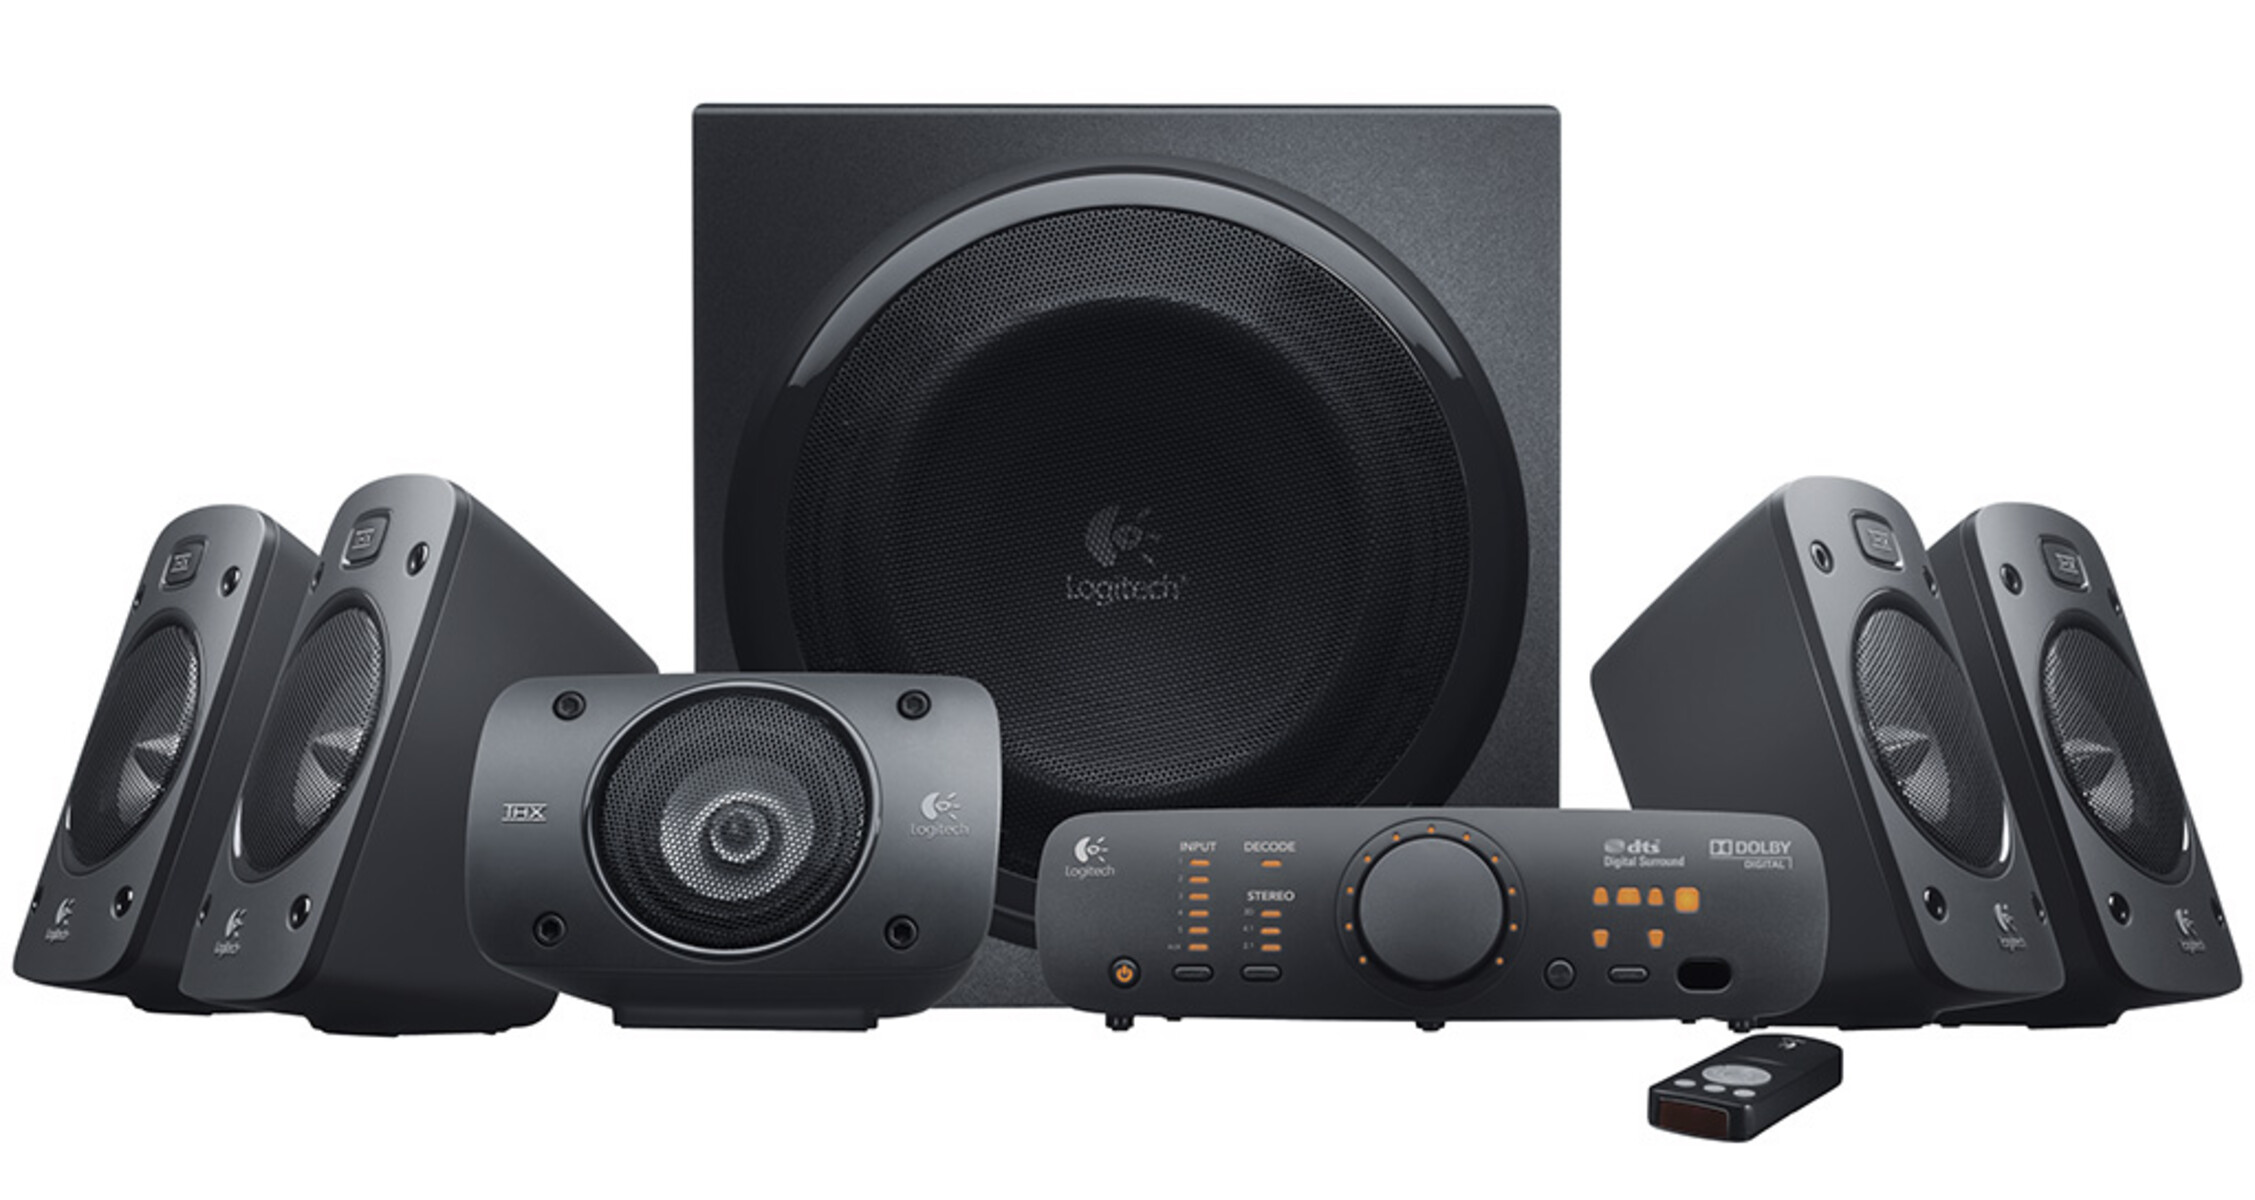 How Many Watts Of Bass Does The Logitech X 540 Surround Sound System Have